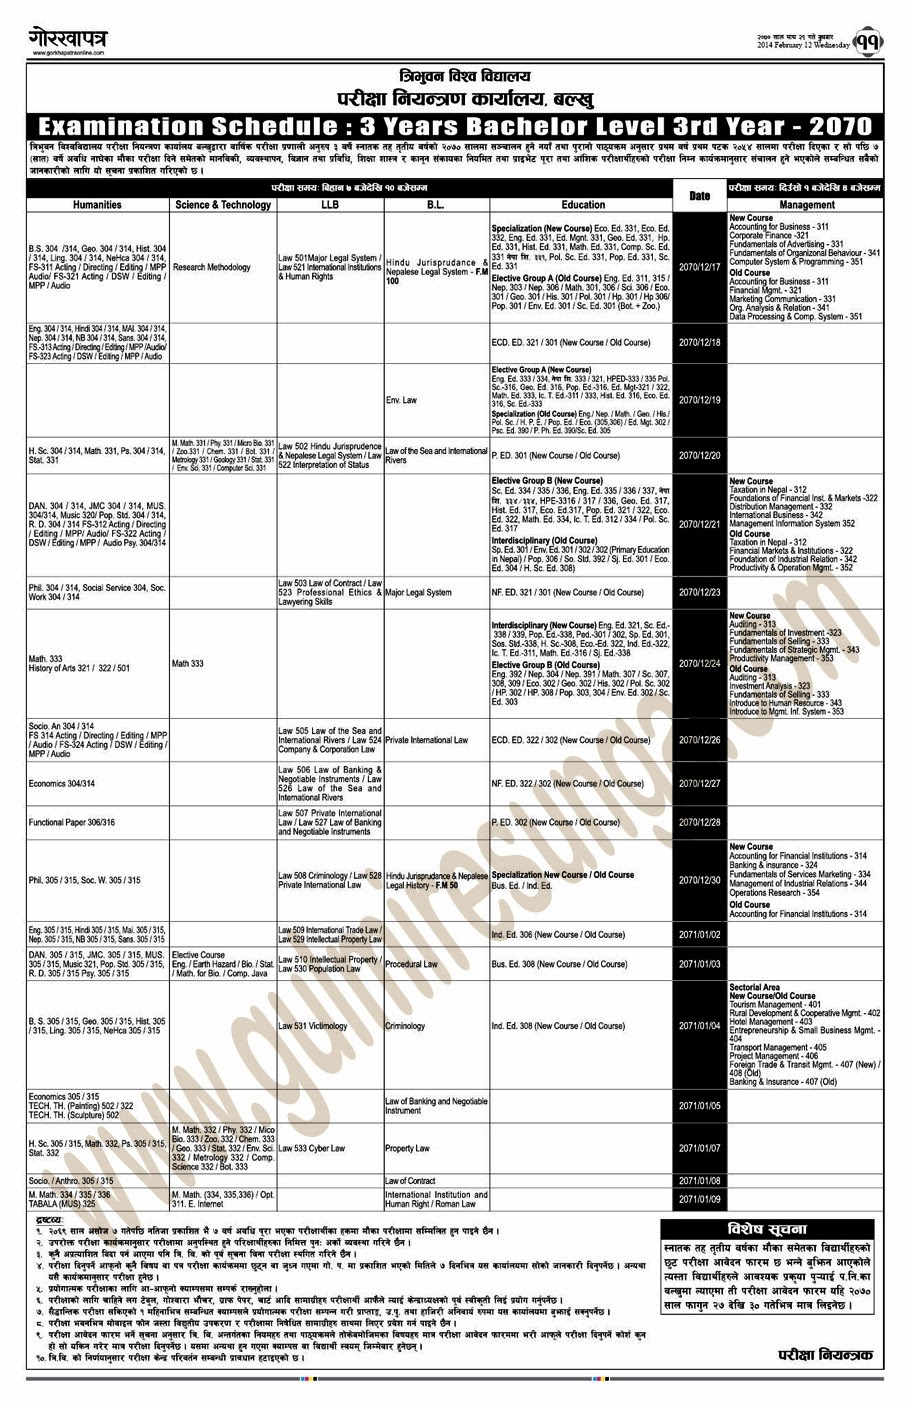 bachelor level 3rd year examination routine